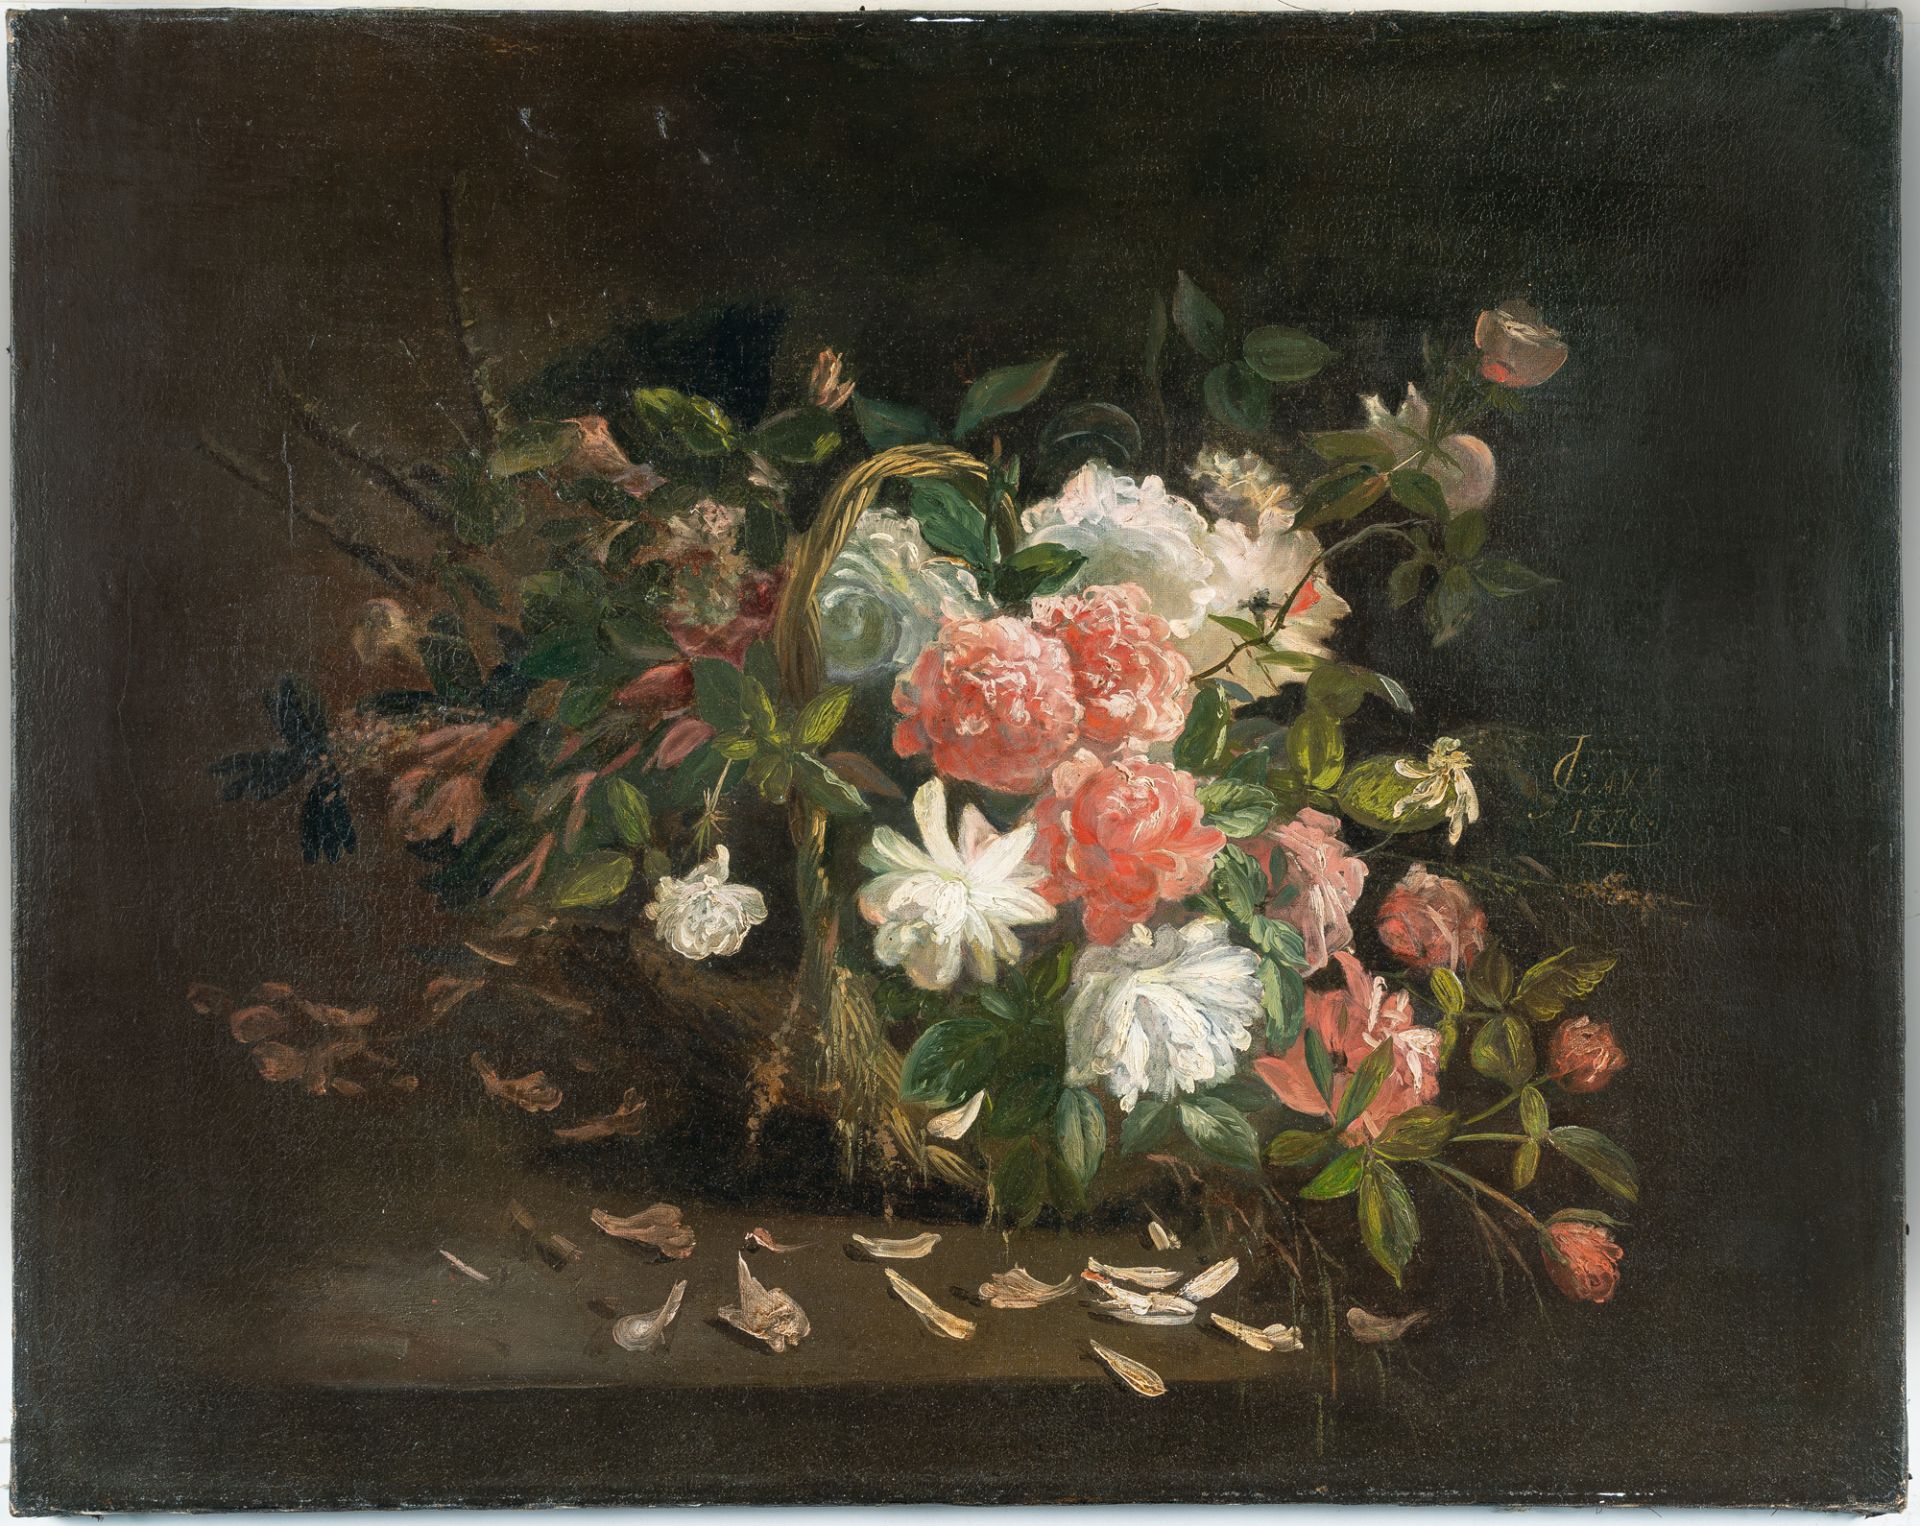 Iphigénie decaux – Flower still life with red and white roses in a basket - Image 2 of 4